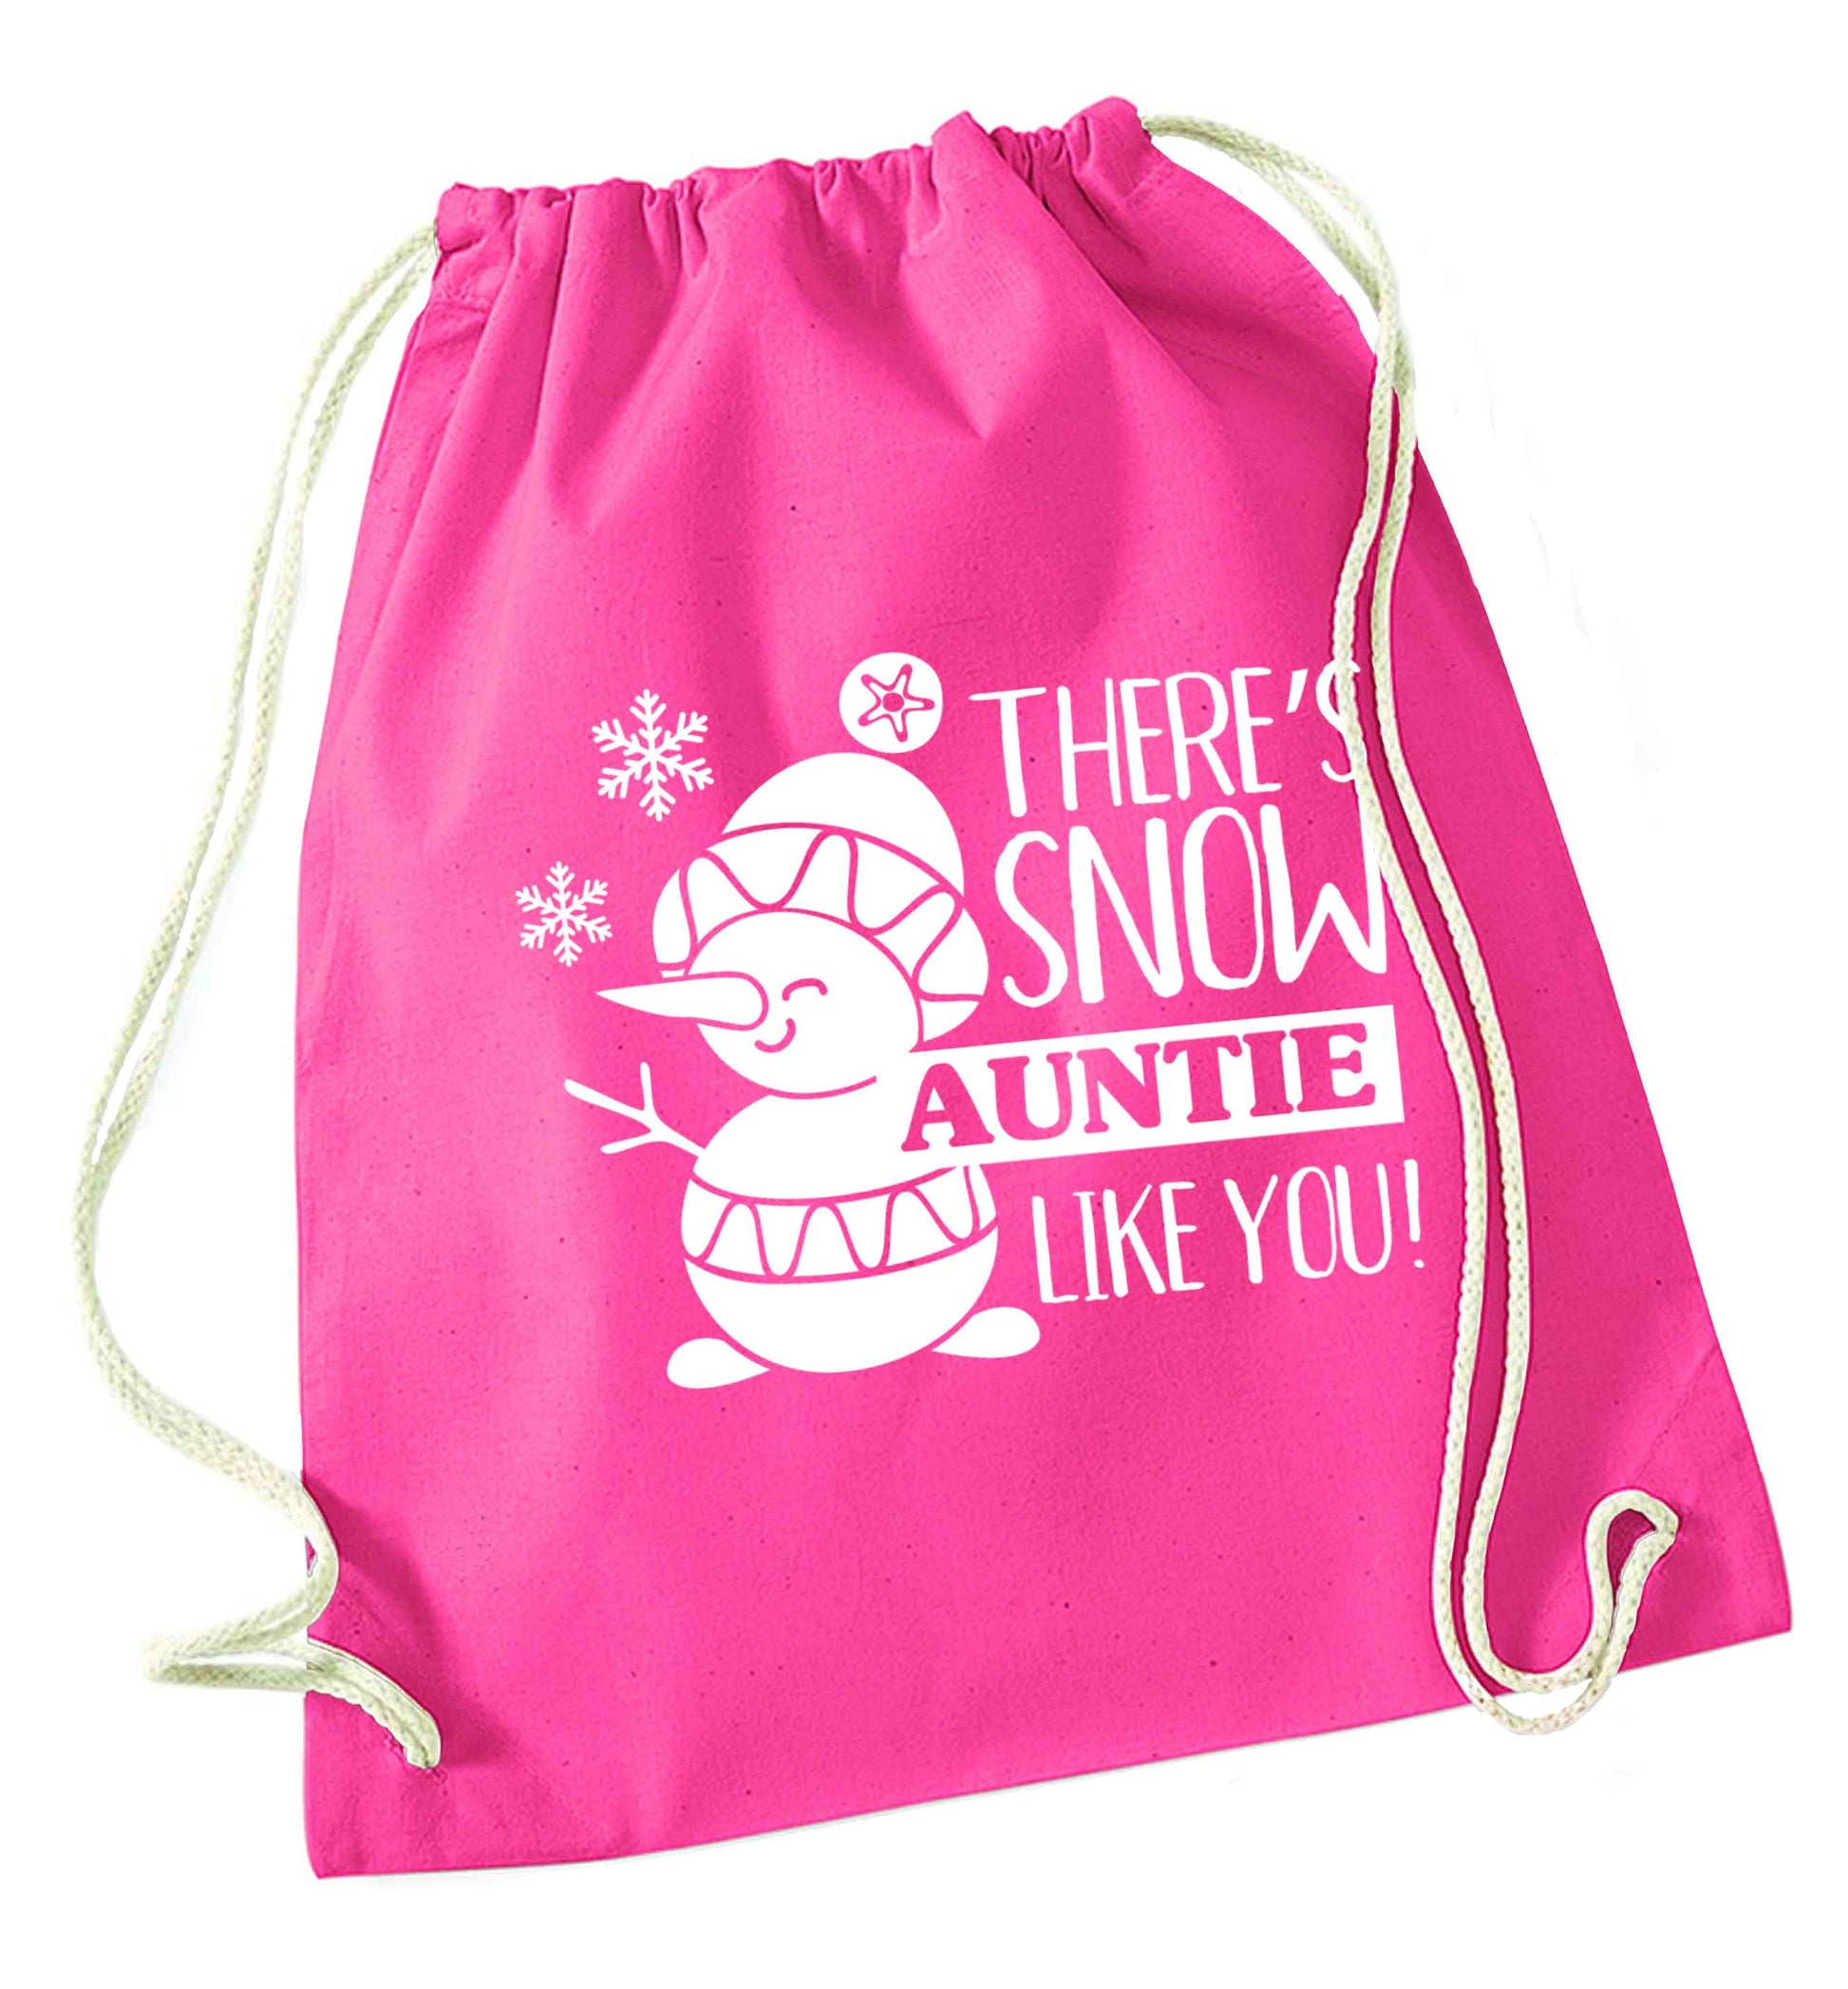 There's snow auntie like you pink drawstring bag